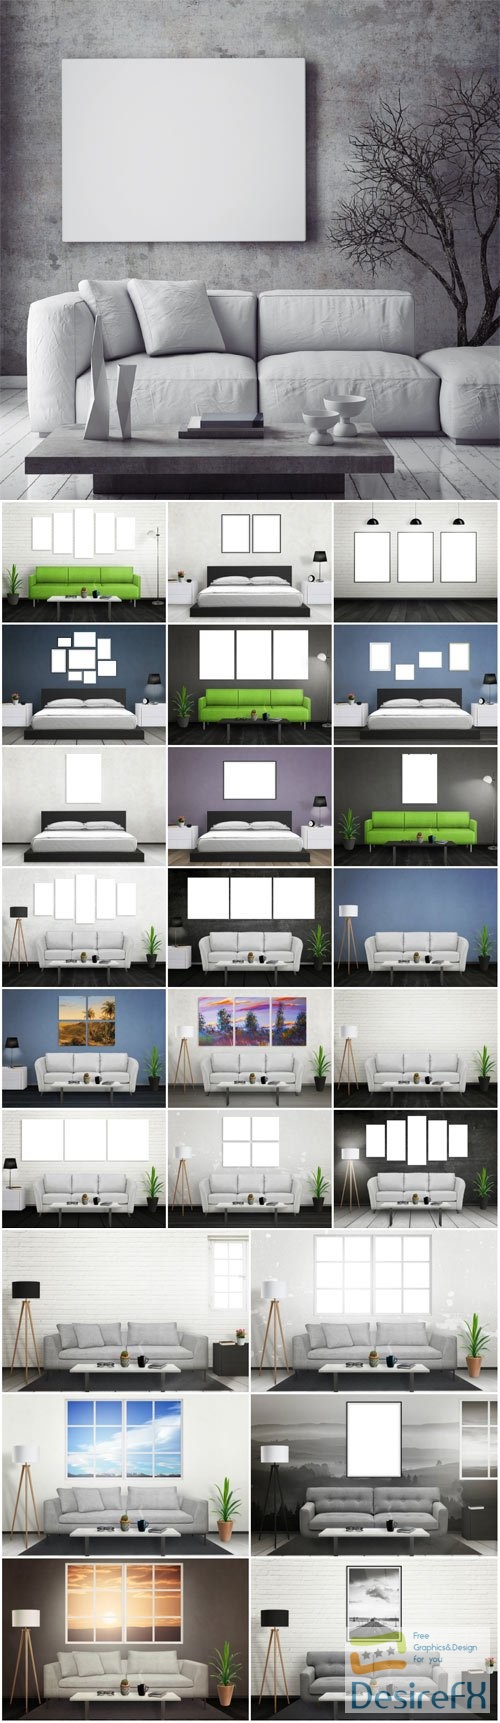 Sofas on wall background with picture stock photo